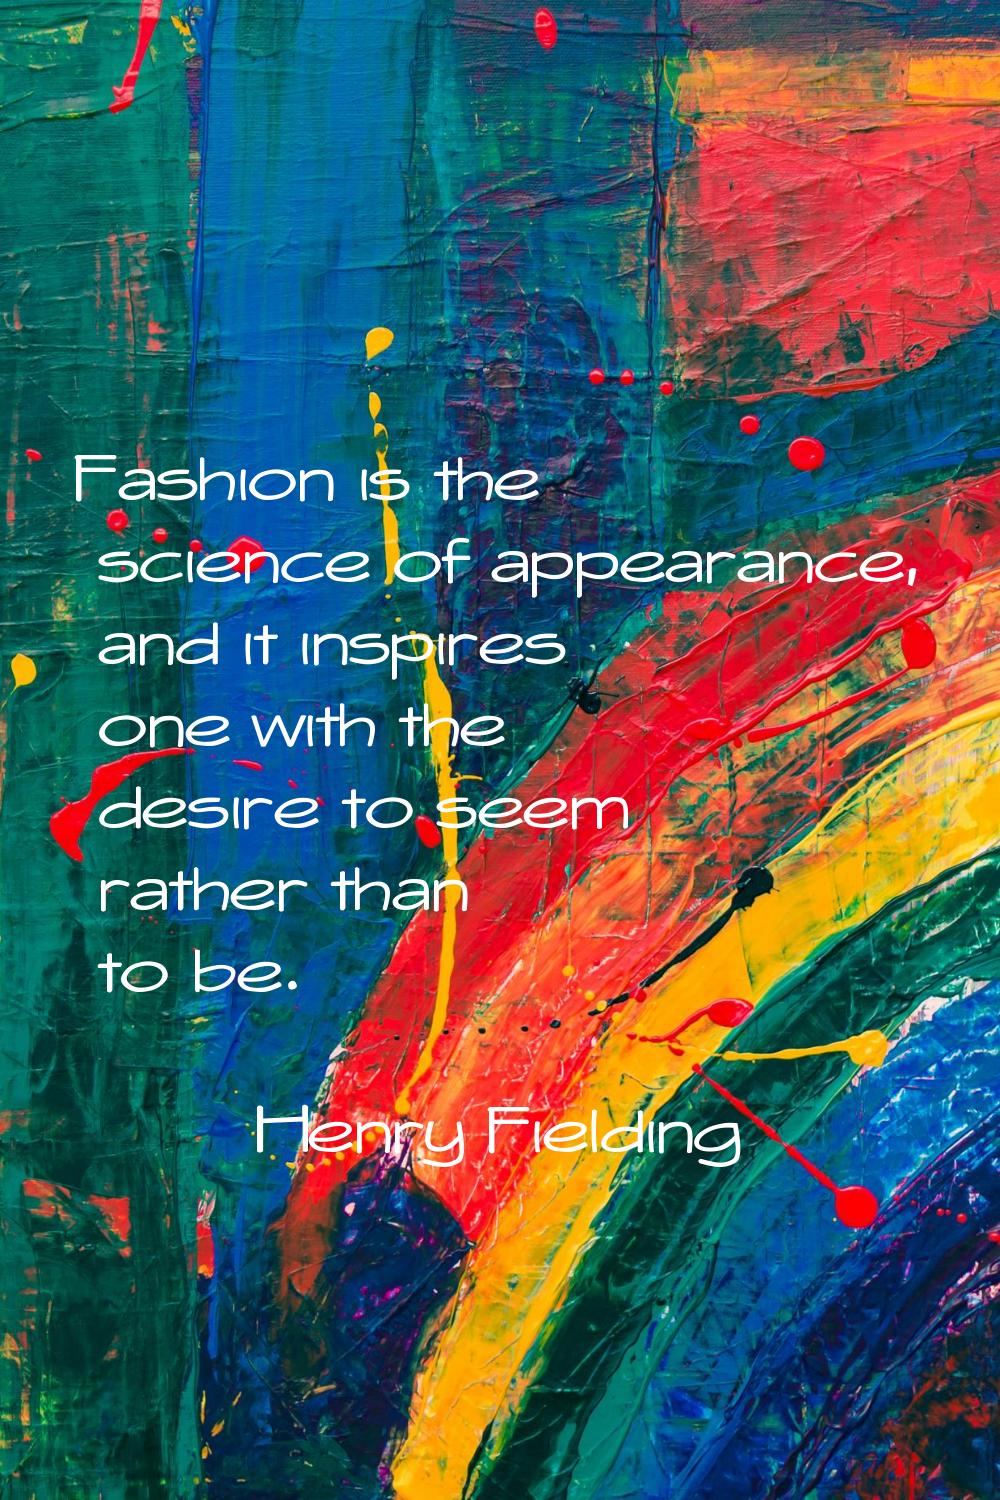 Fashion is the science of appearance, and it inspires one with the desire to seem rather than to be